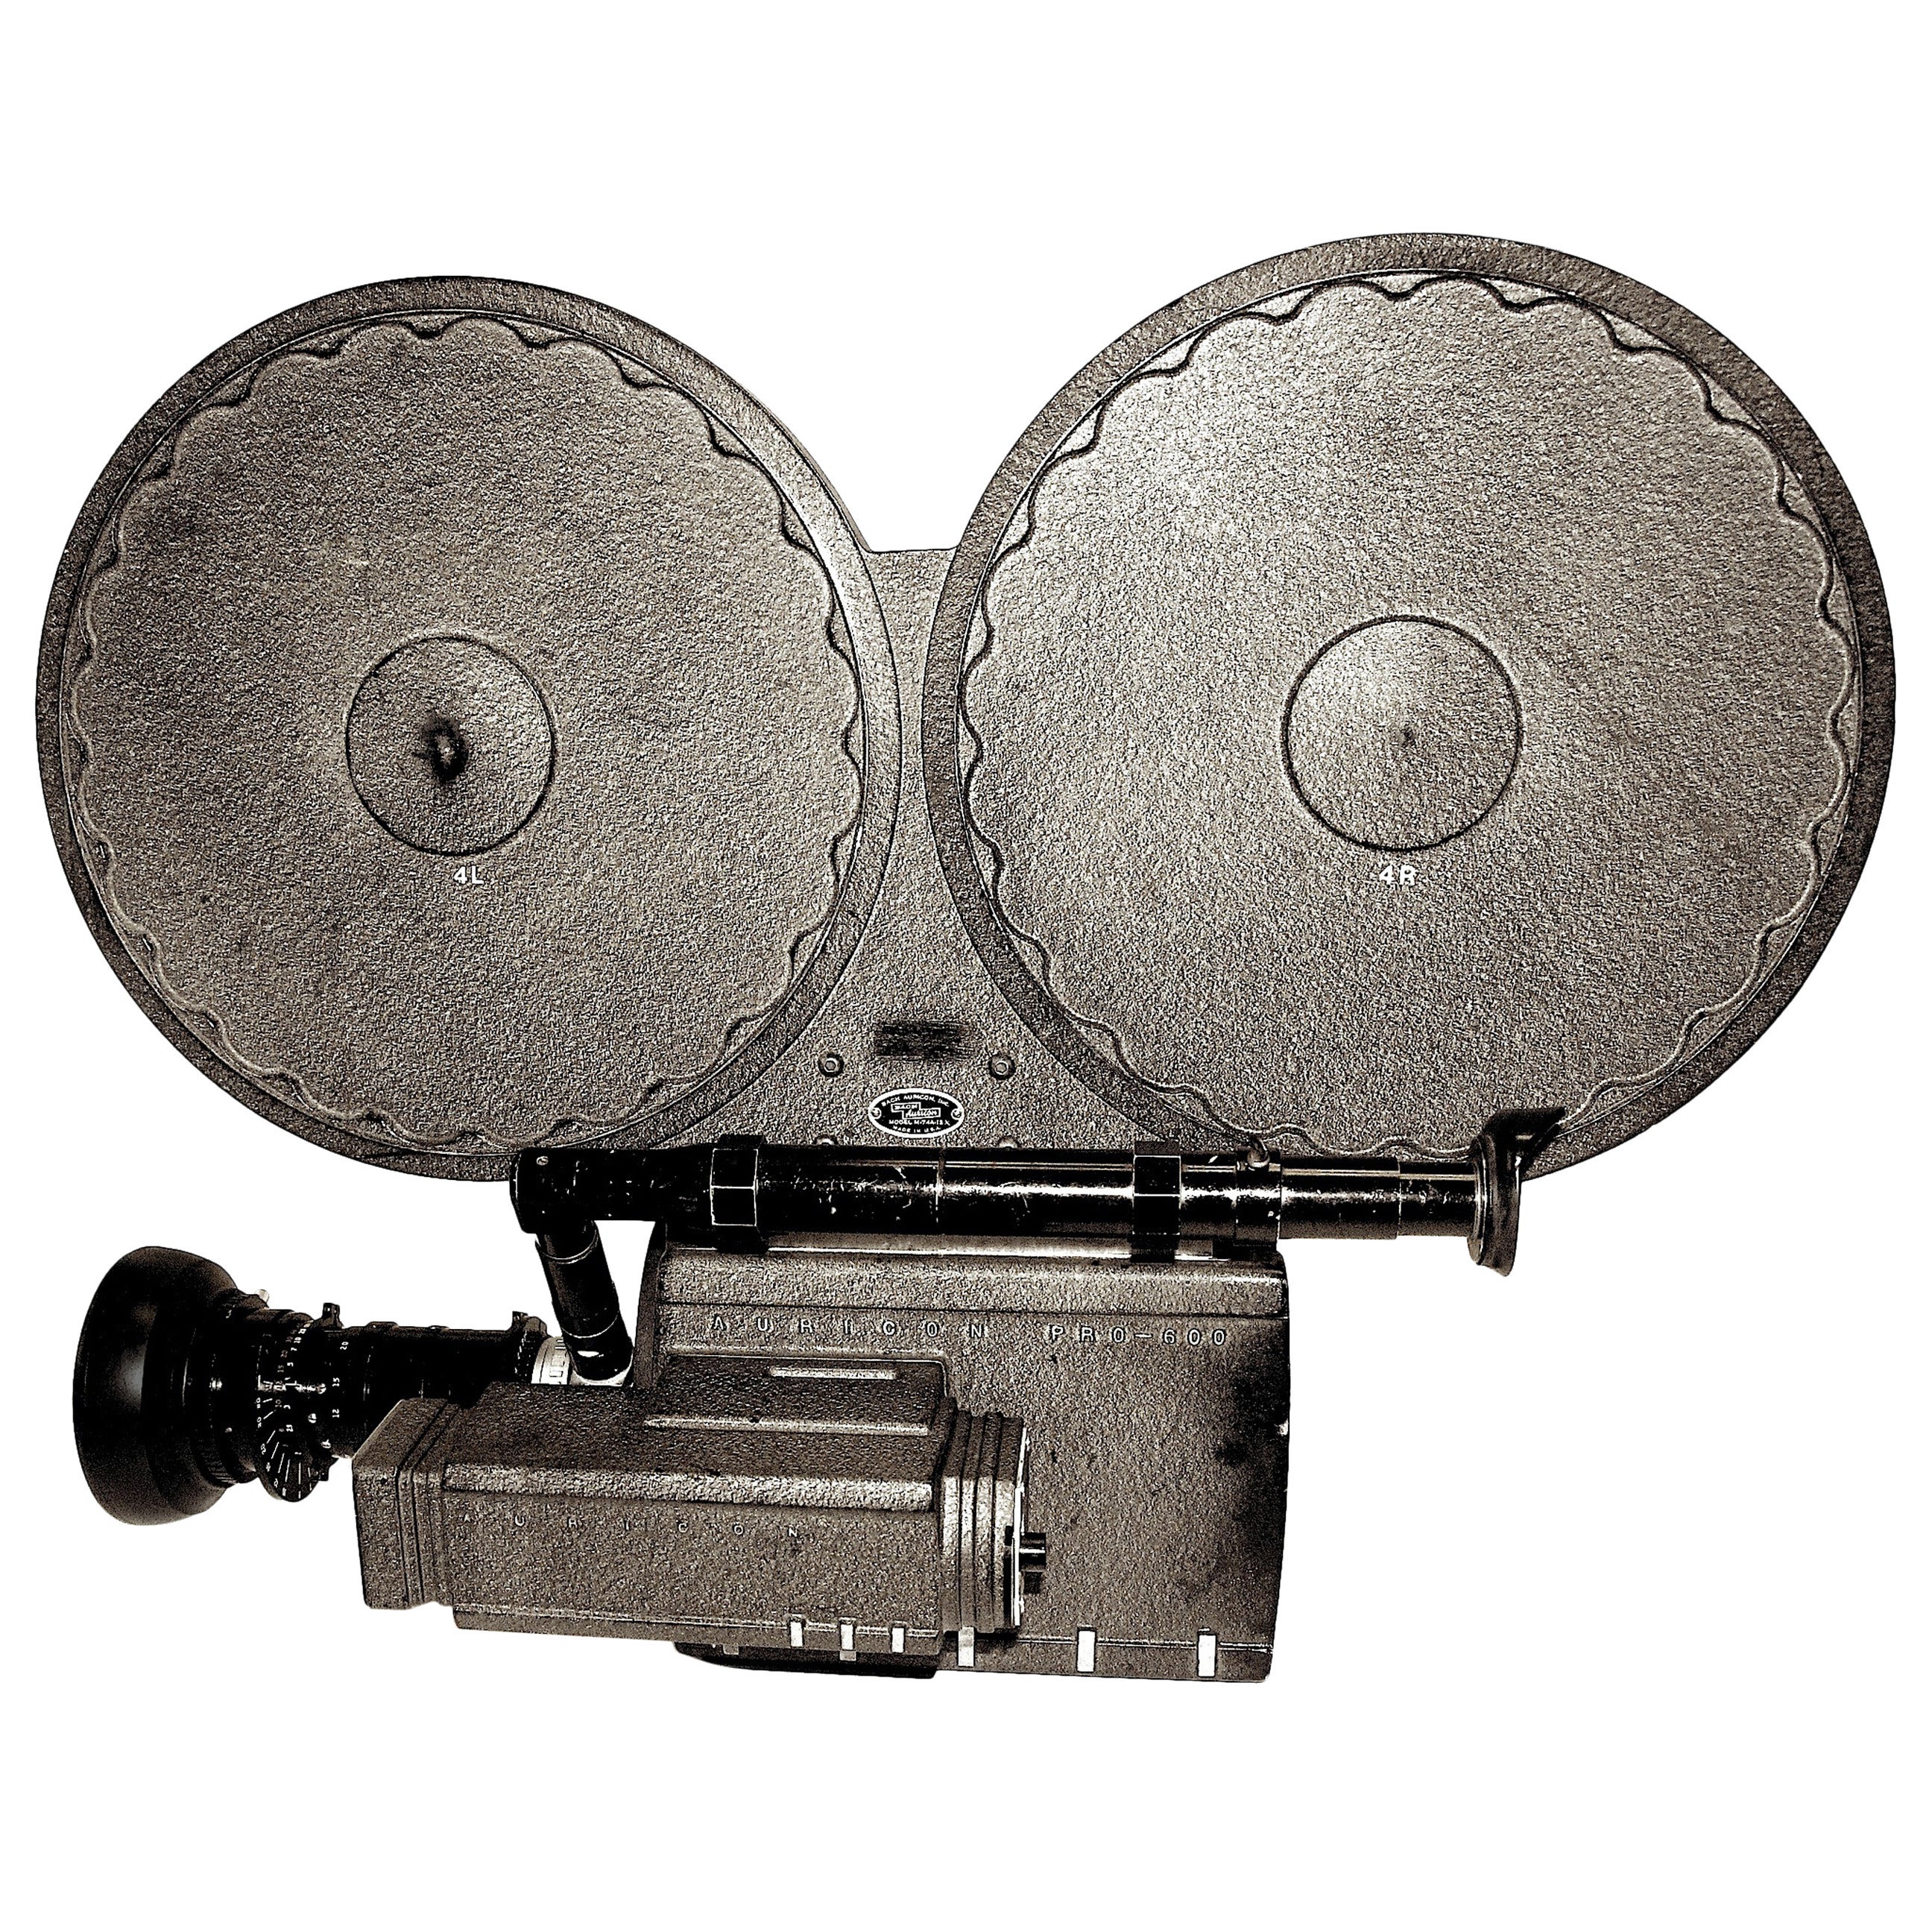 Auricon Cinema Newsreel Camera, Complete and Working. As Sculpture, Circa 1955. For Sale